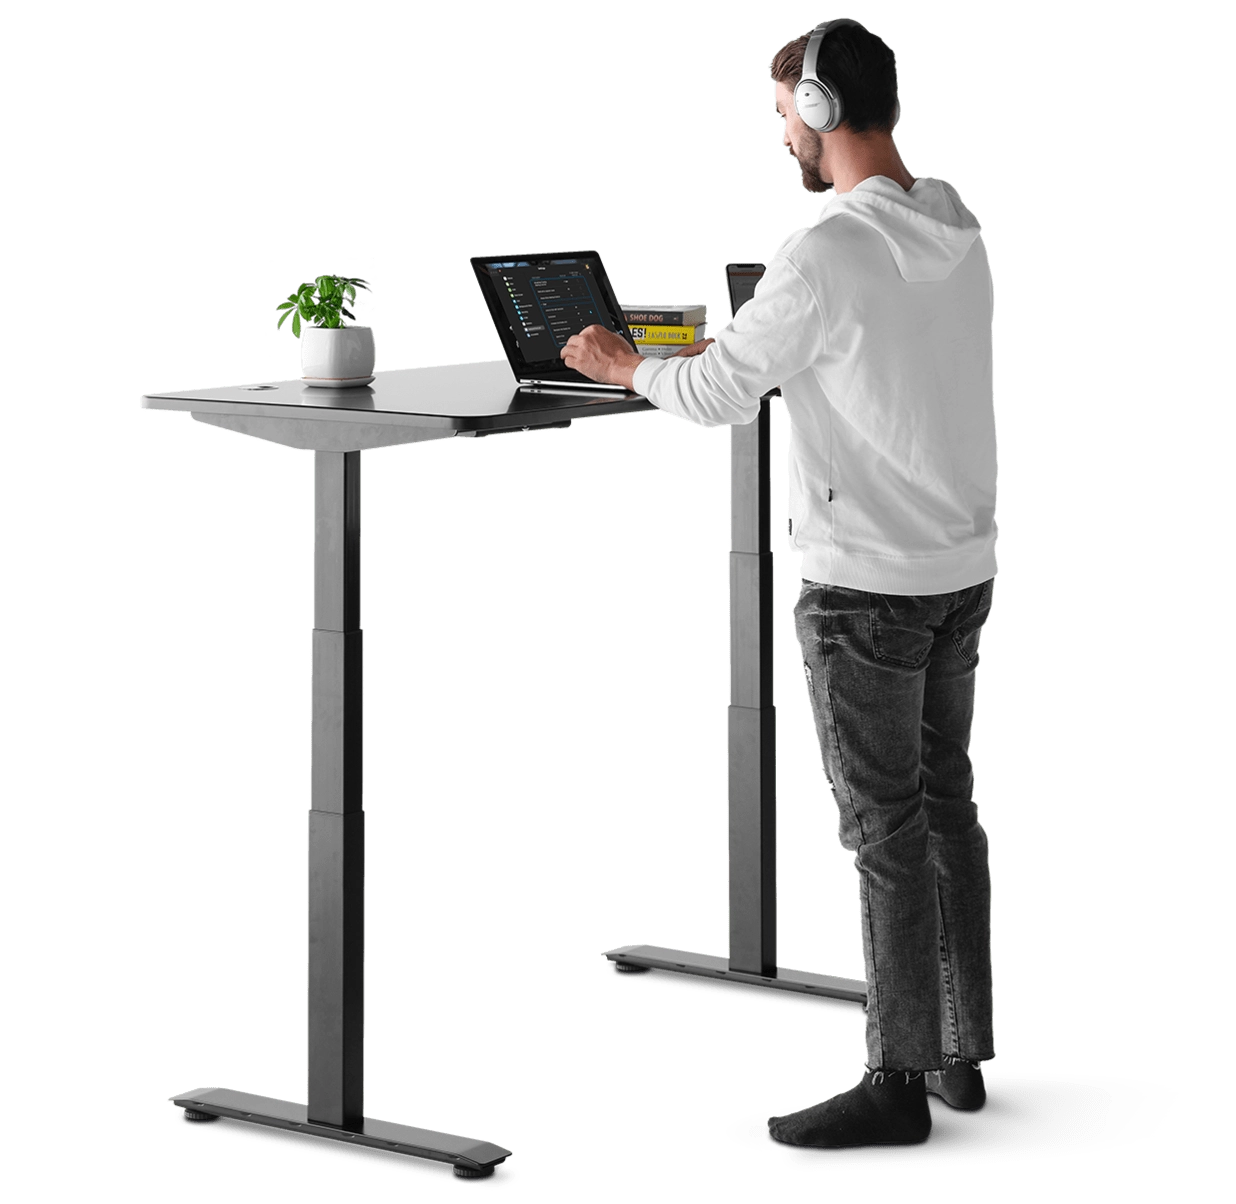 Why use a standing desk?